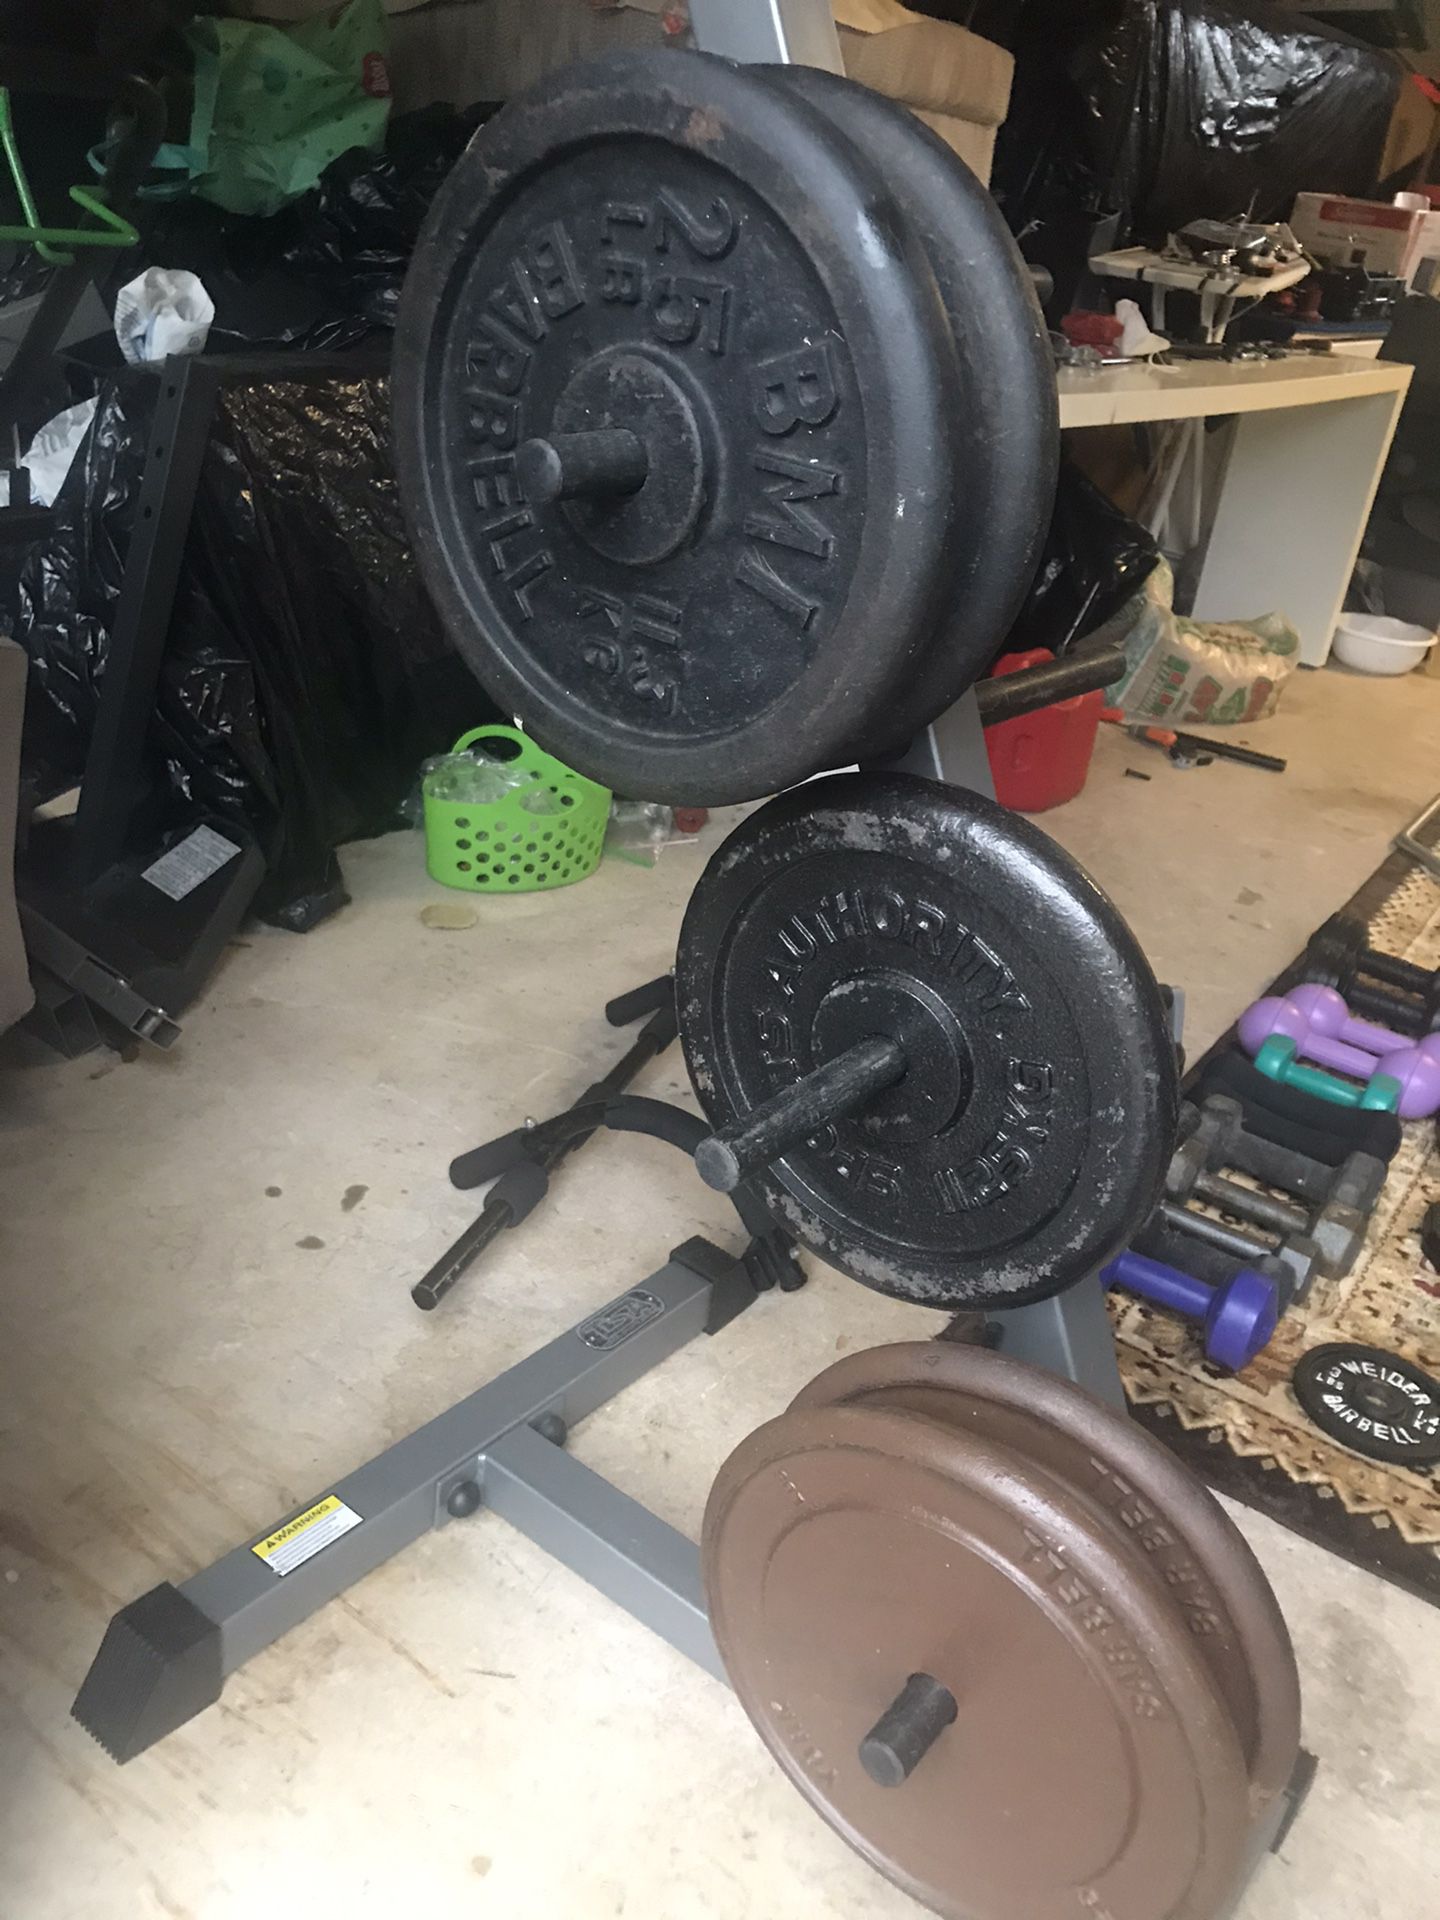 125 Lbs standard 1 inch weights plates